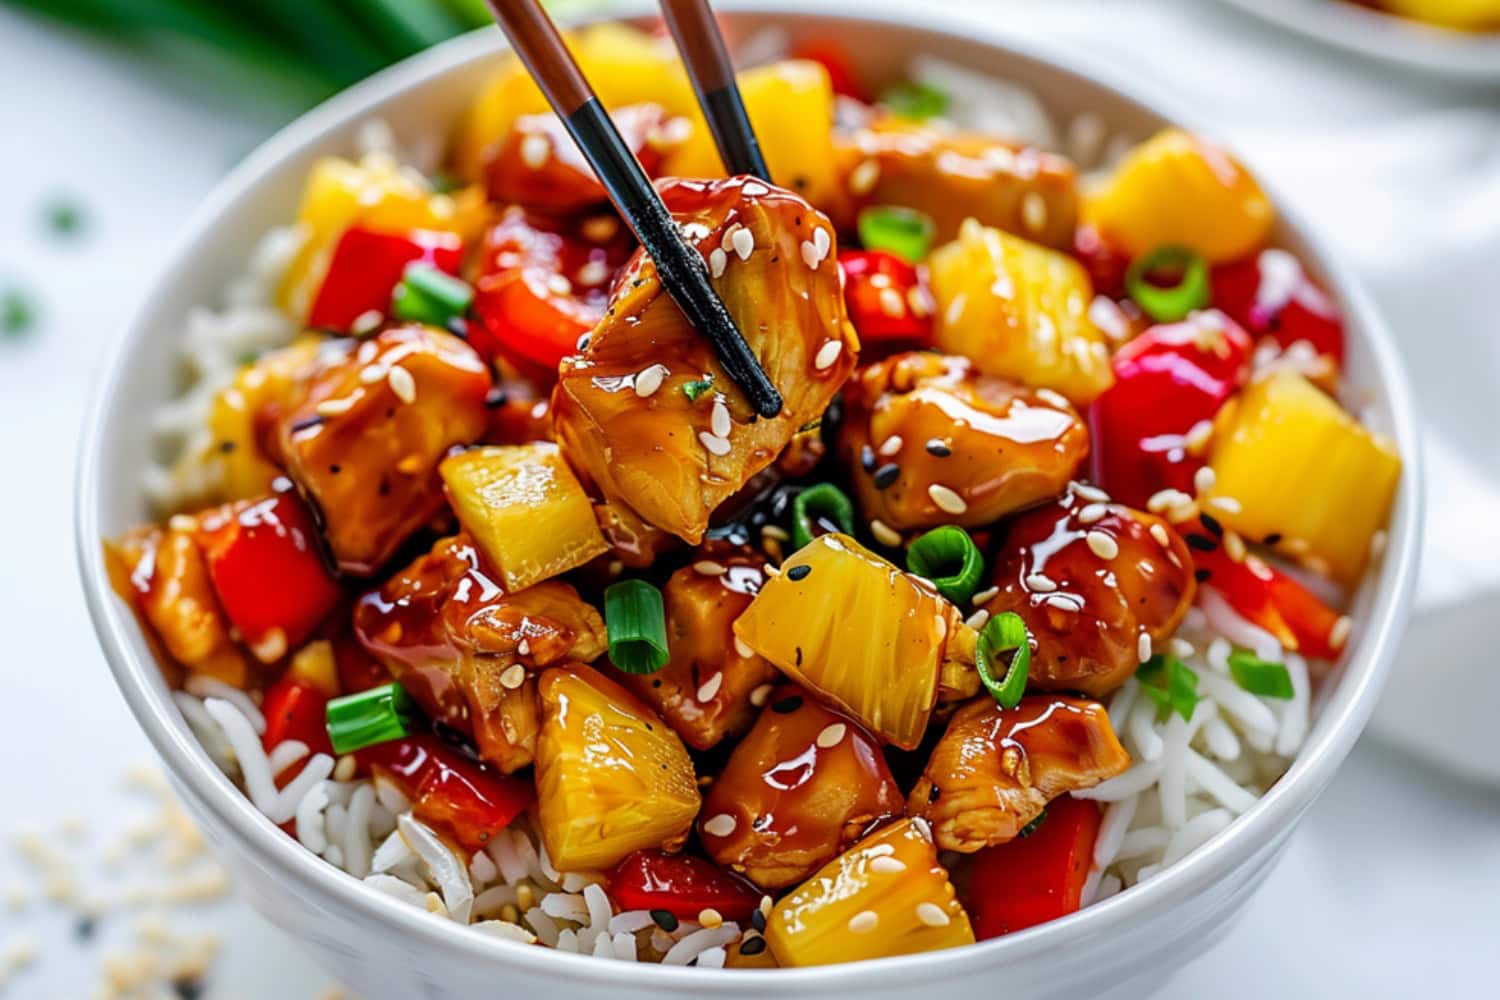 Pineapple chicken stir fry in a bowl of white rice garnished with sesame seeds.